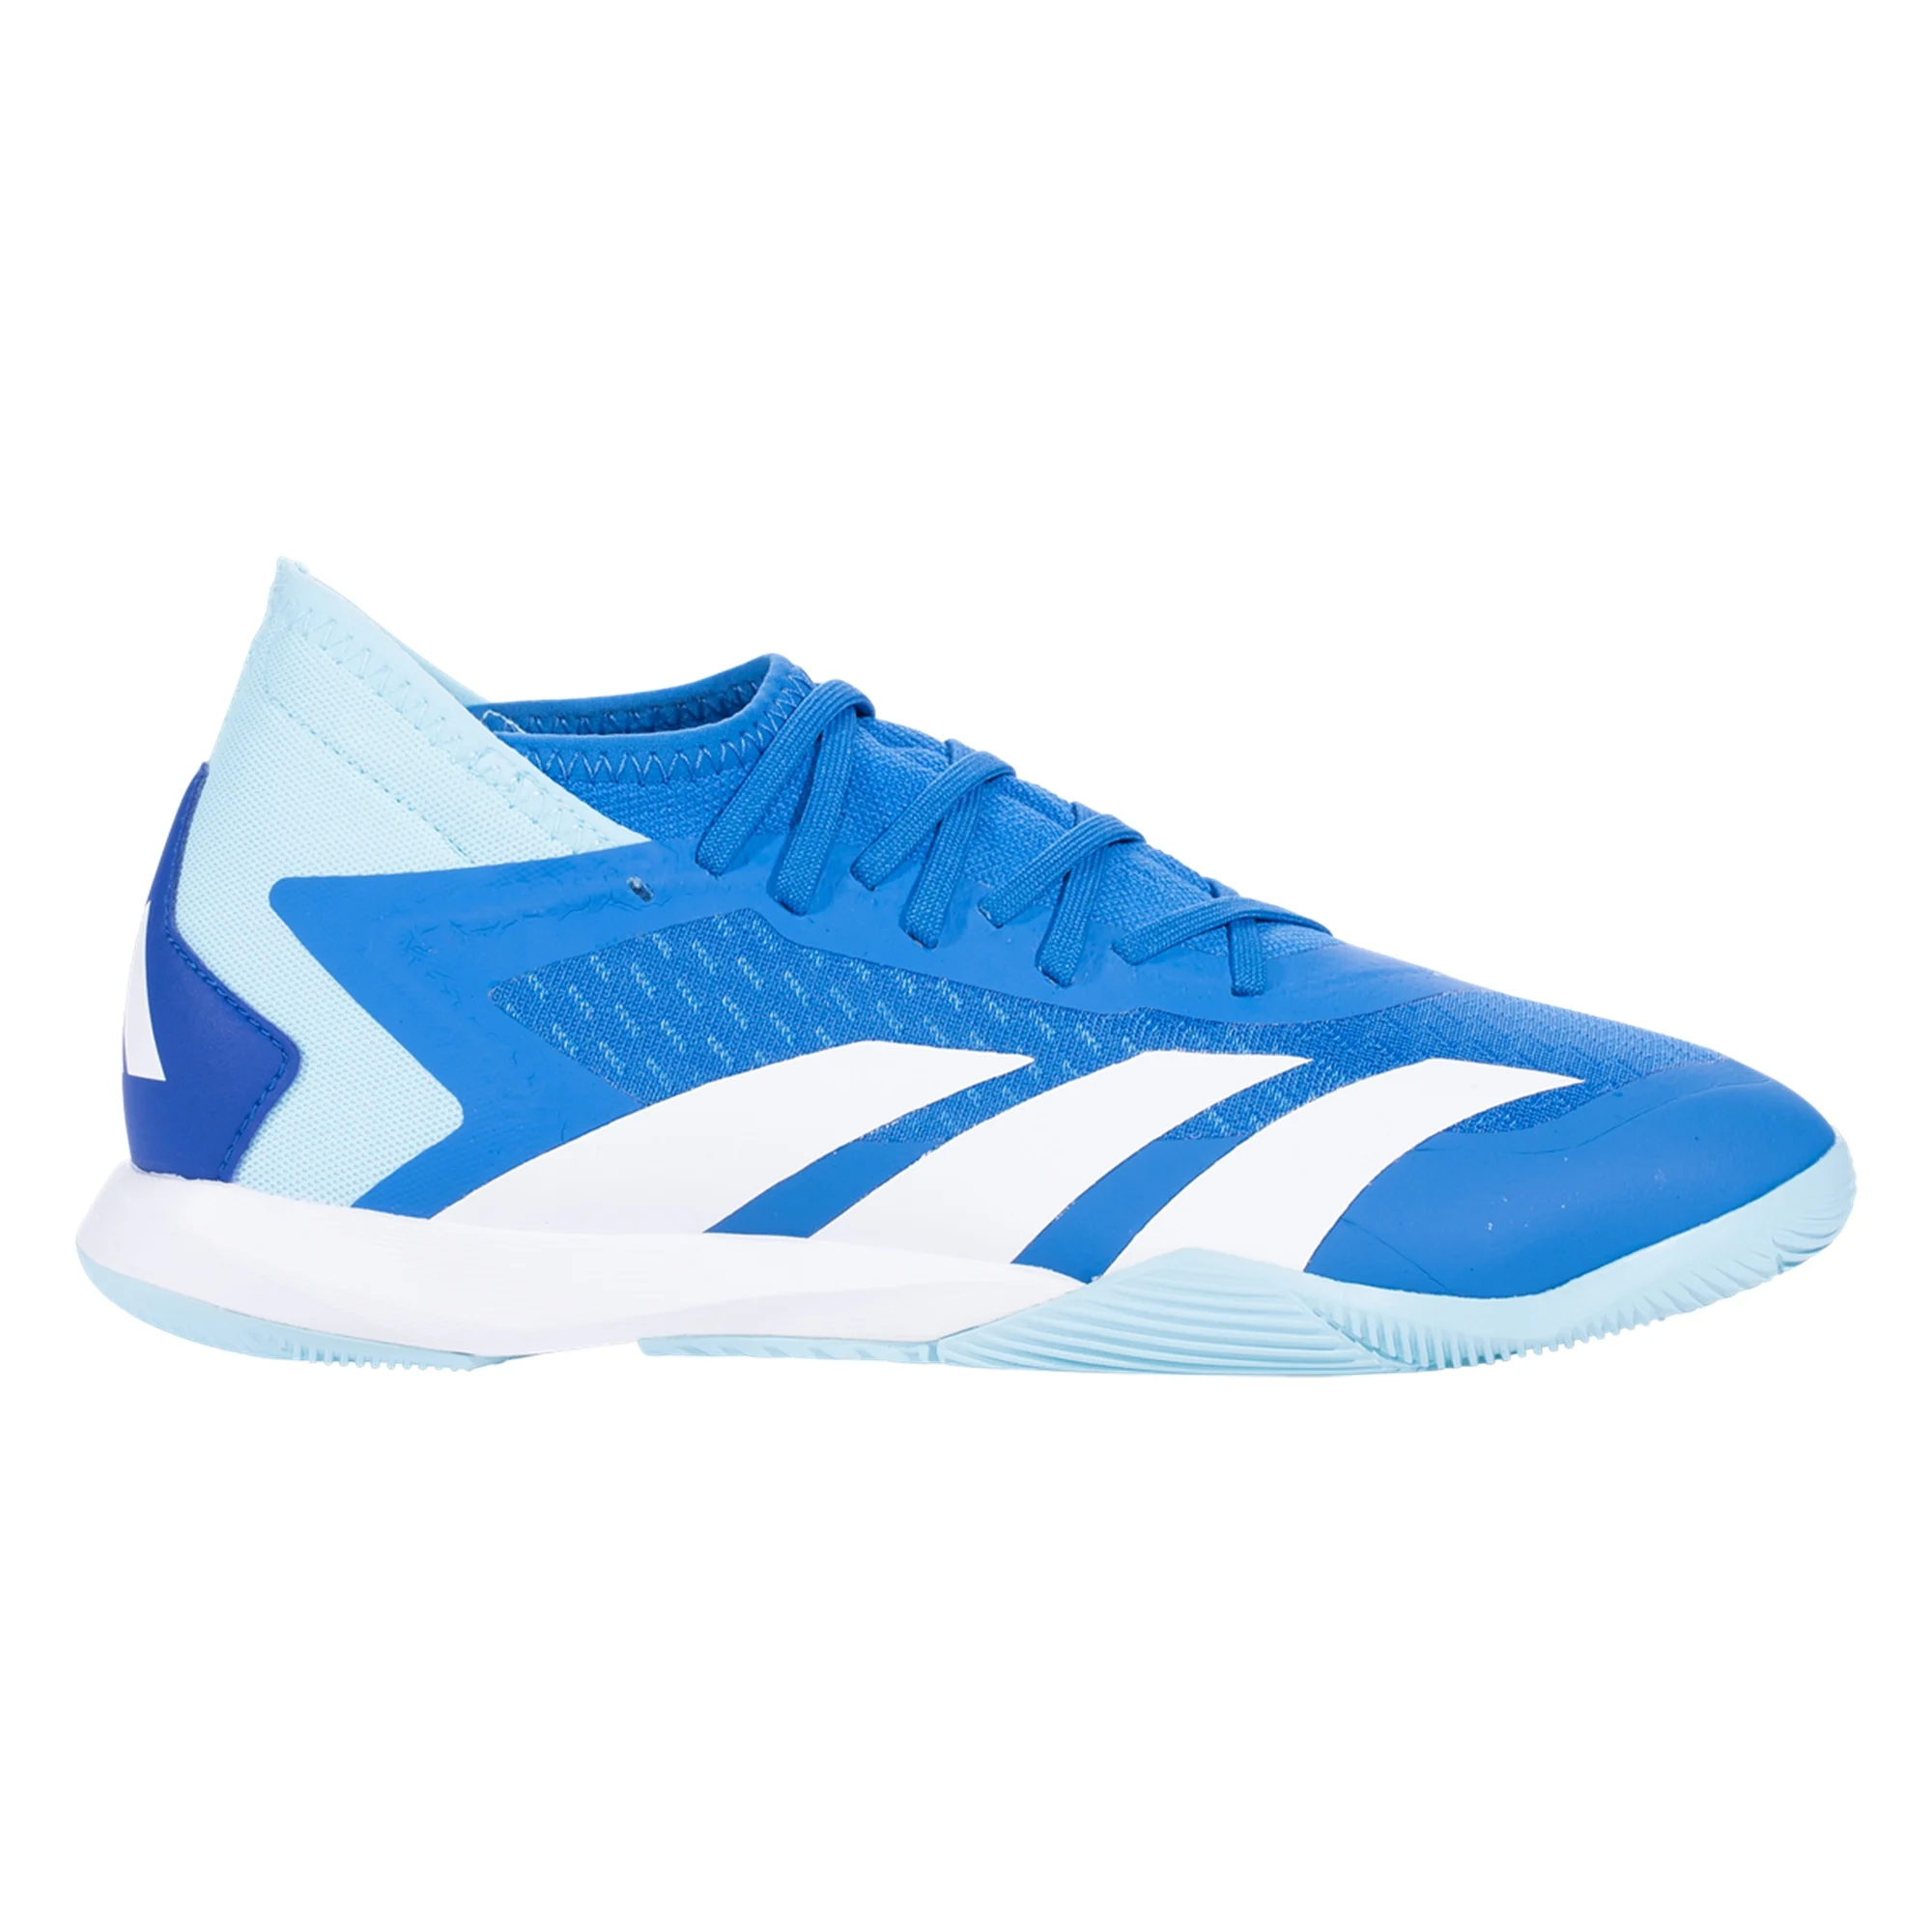 adidas Predator Accuracy.3 Indoor Blu Soccer Soccer (Bright Wearhouse Shoes Royal/Bliss 